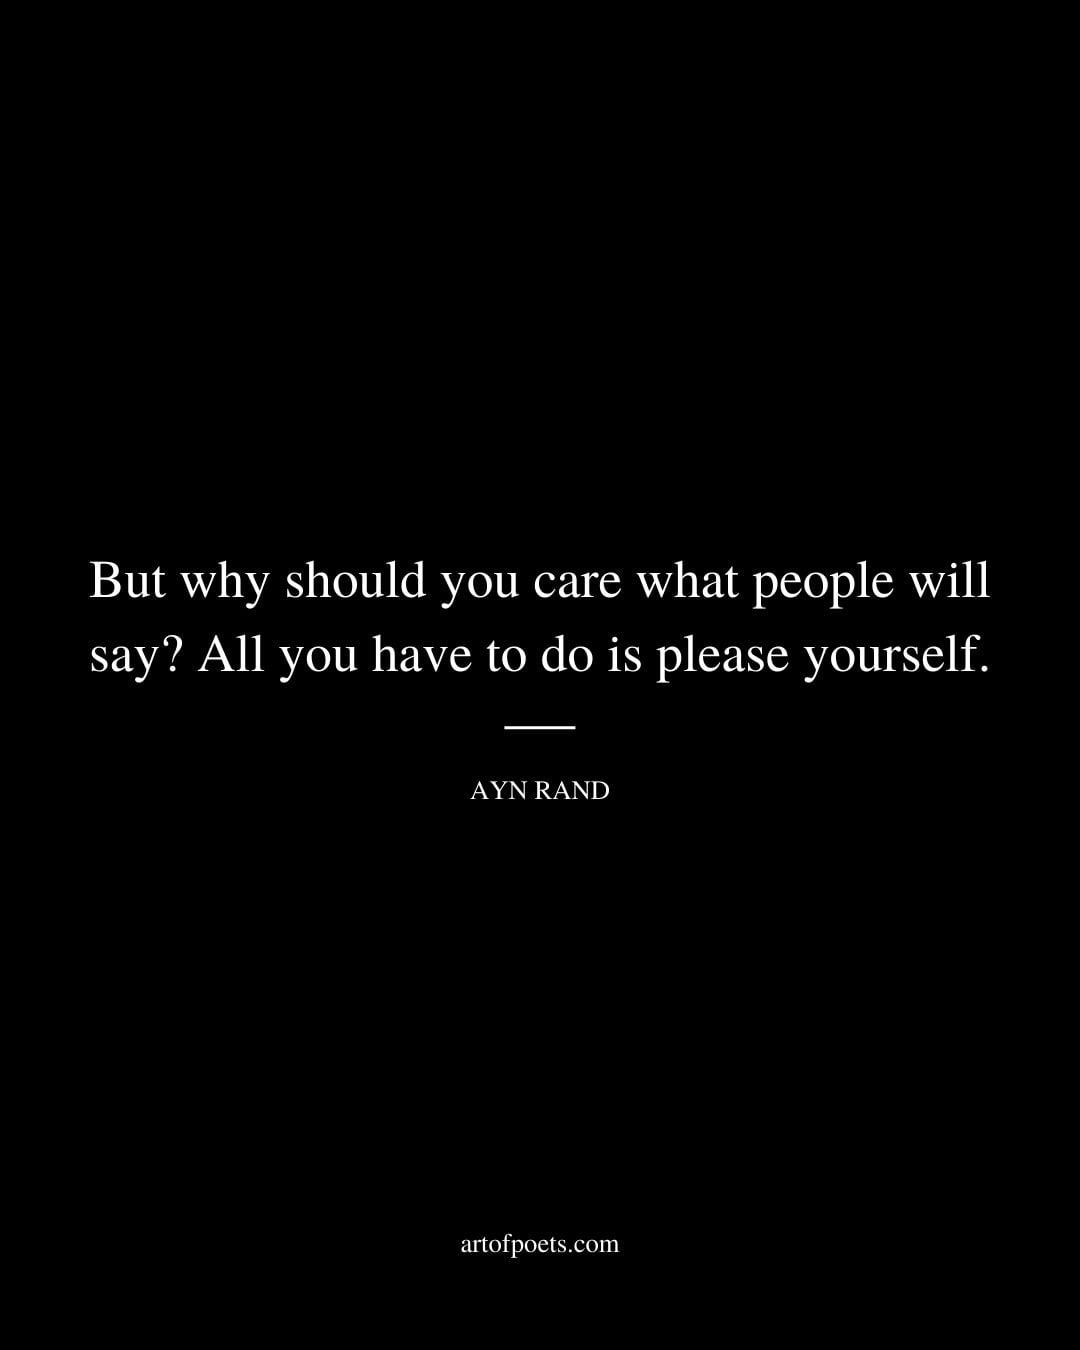 But why should you care what people will say All you have to do is please yourself